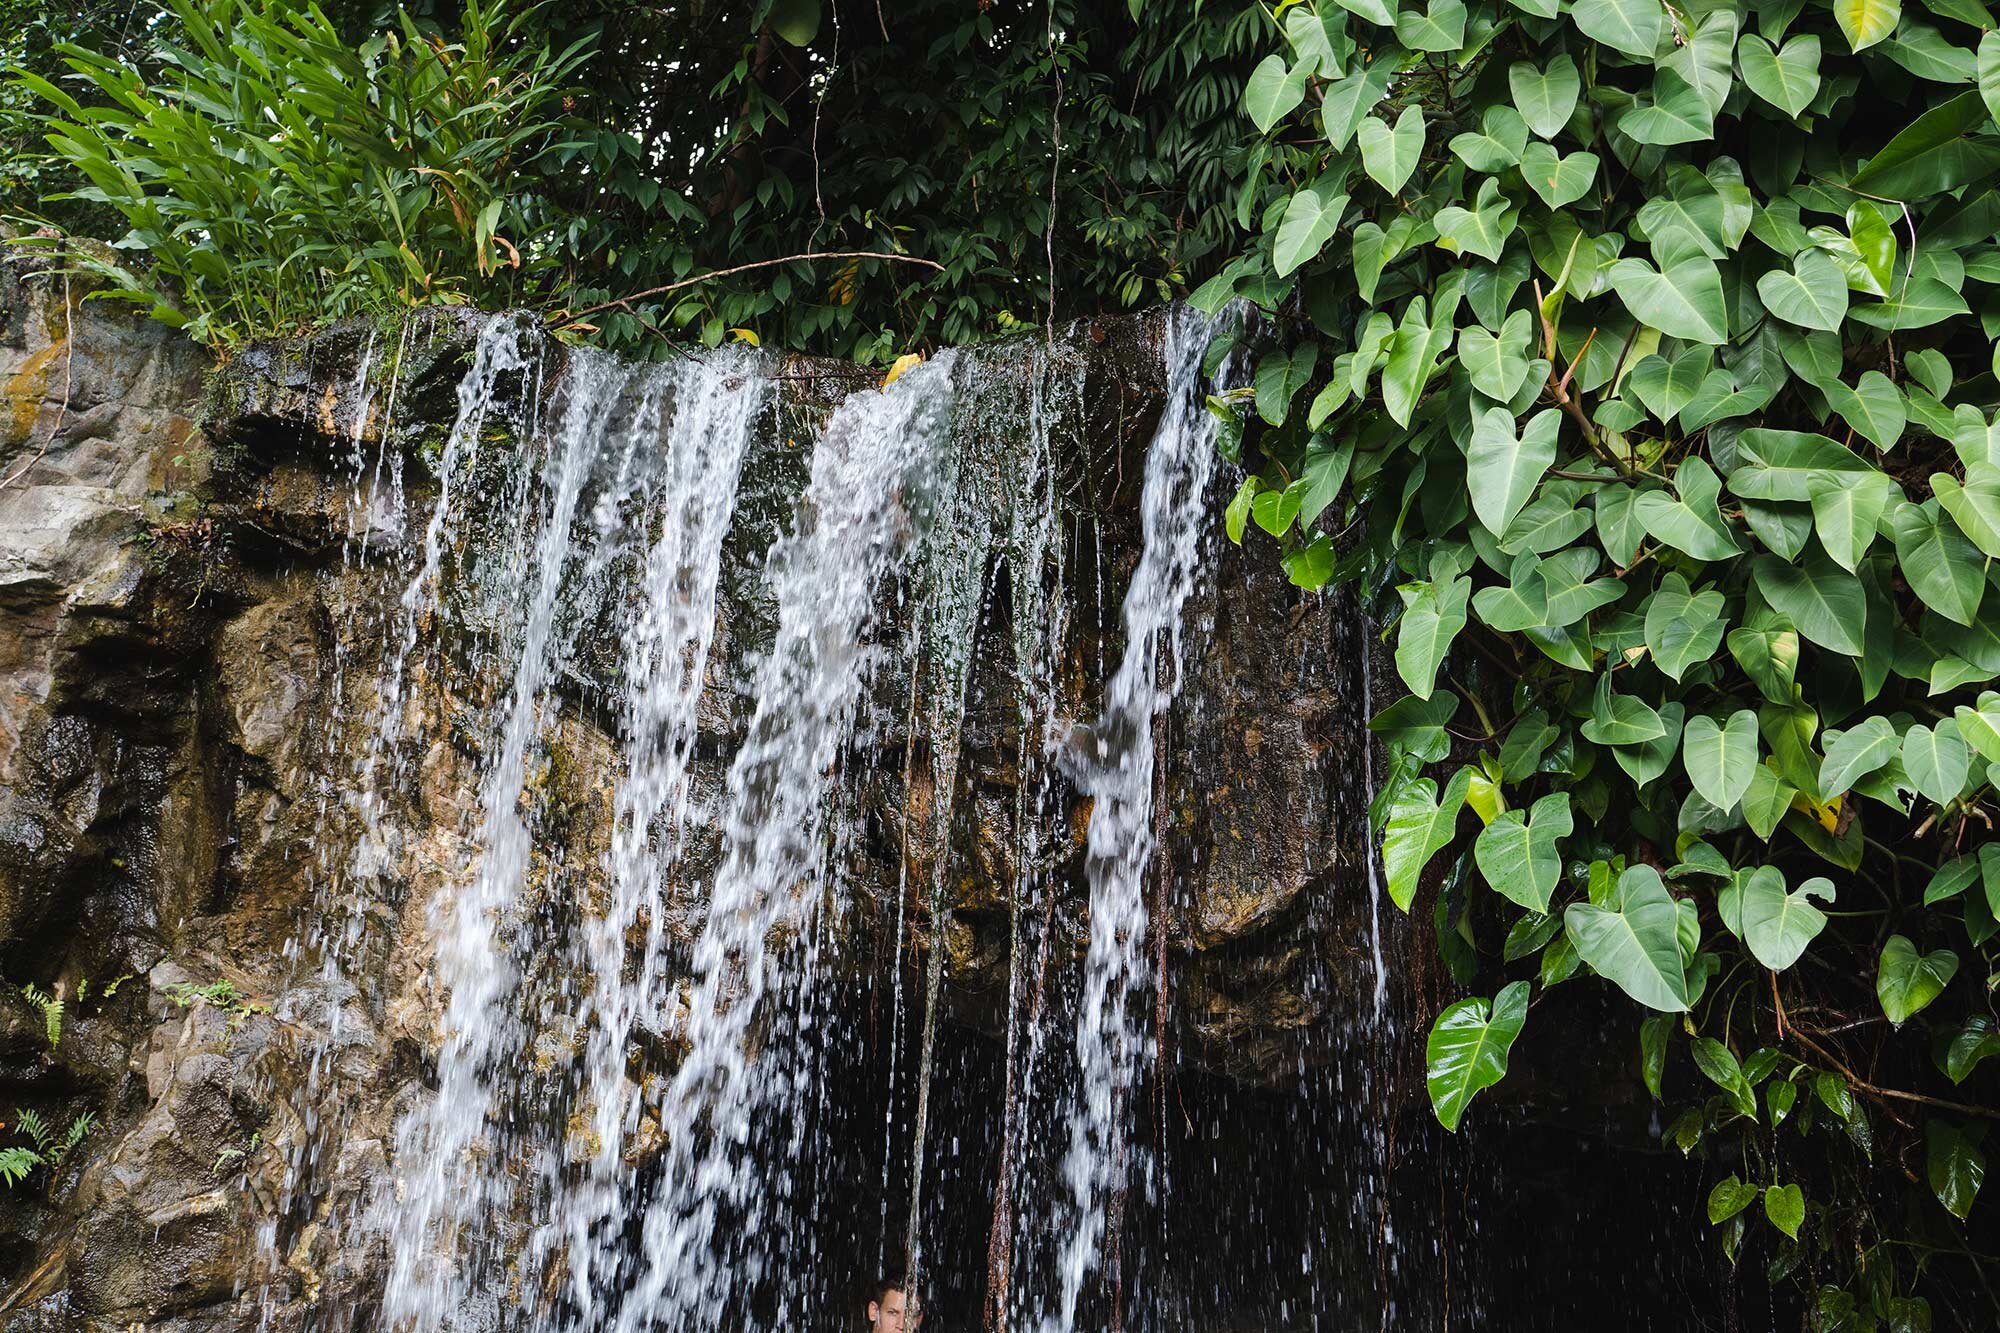 In the centre of Singapore's&nbsp;Botanical Gardens&nbsp;there is a man-made&nbsp;waterfall&nbsp;which you can walk behind.